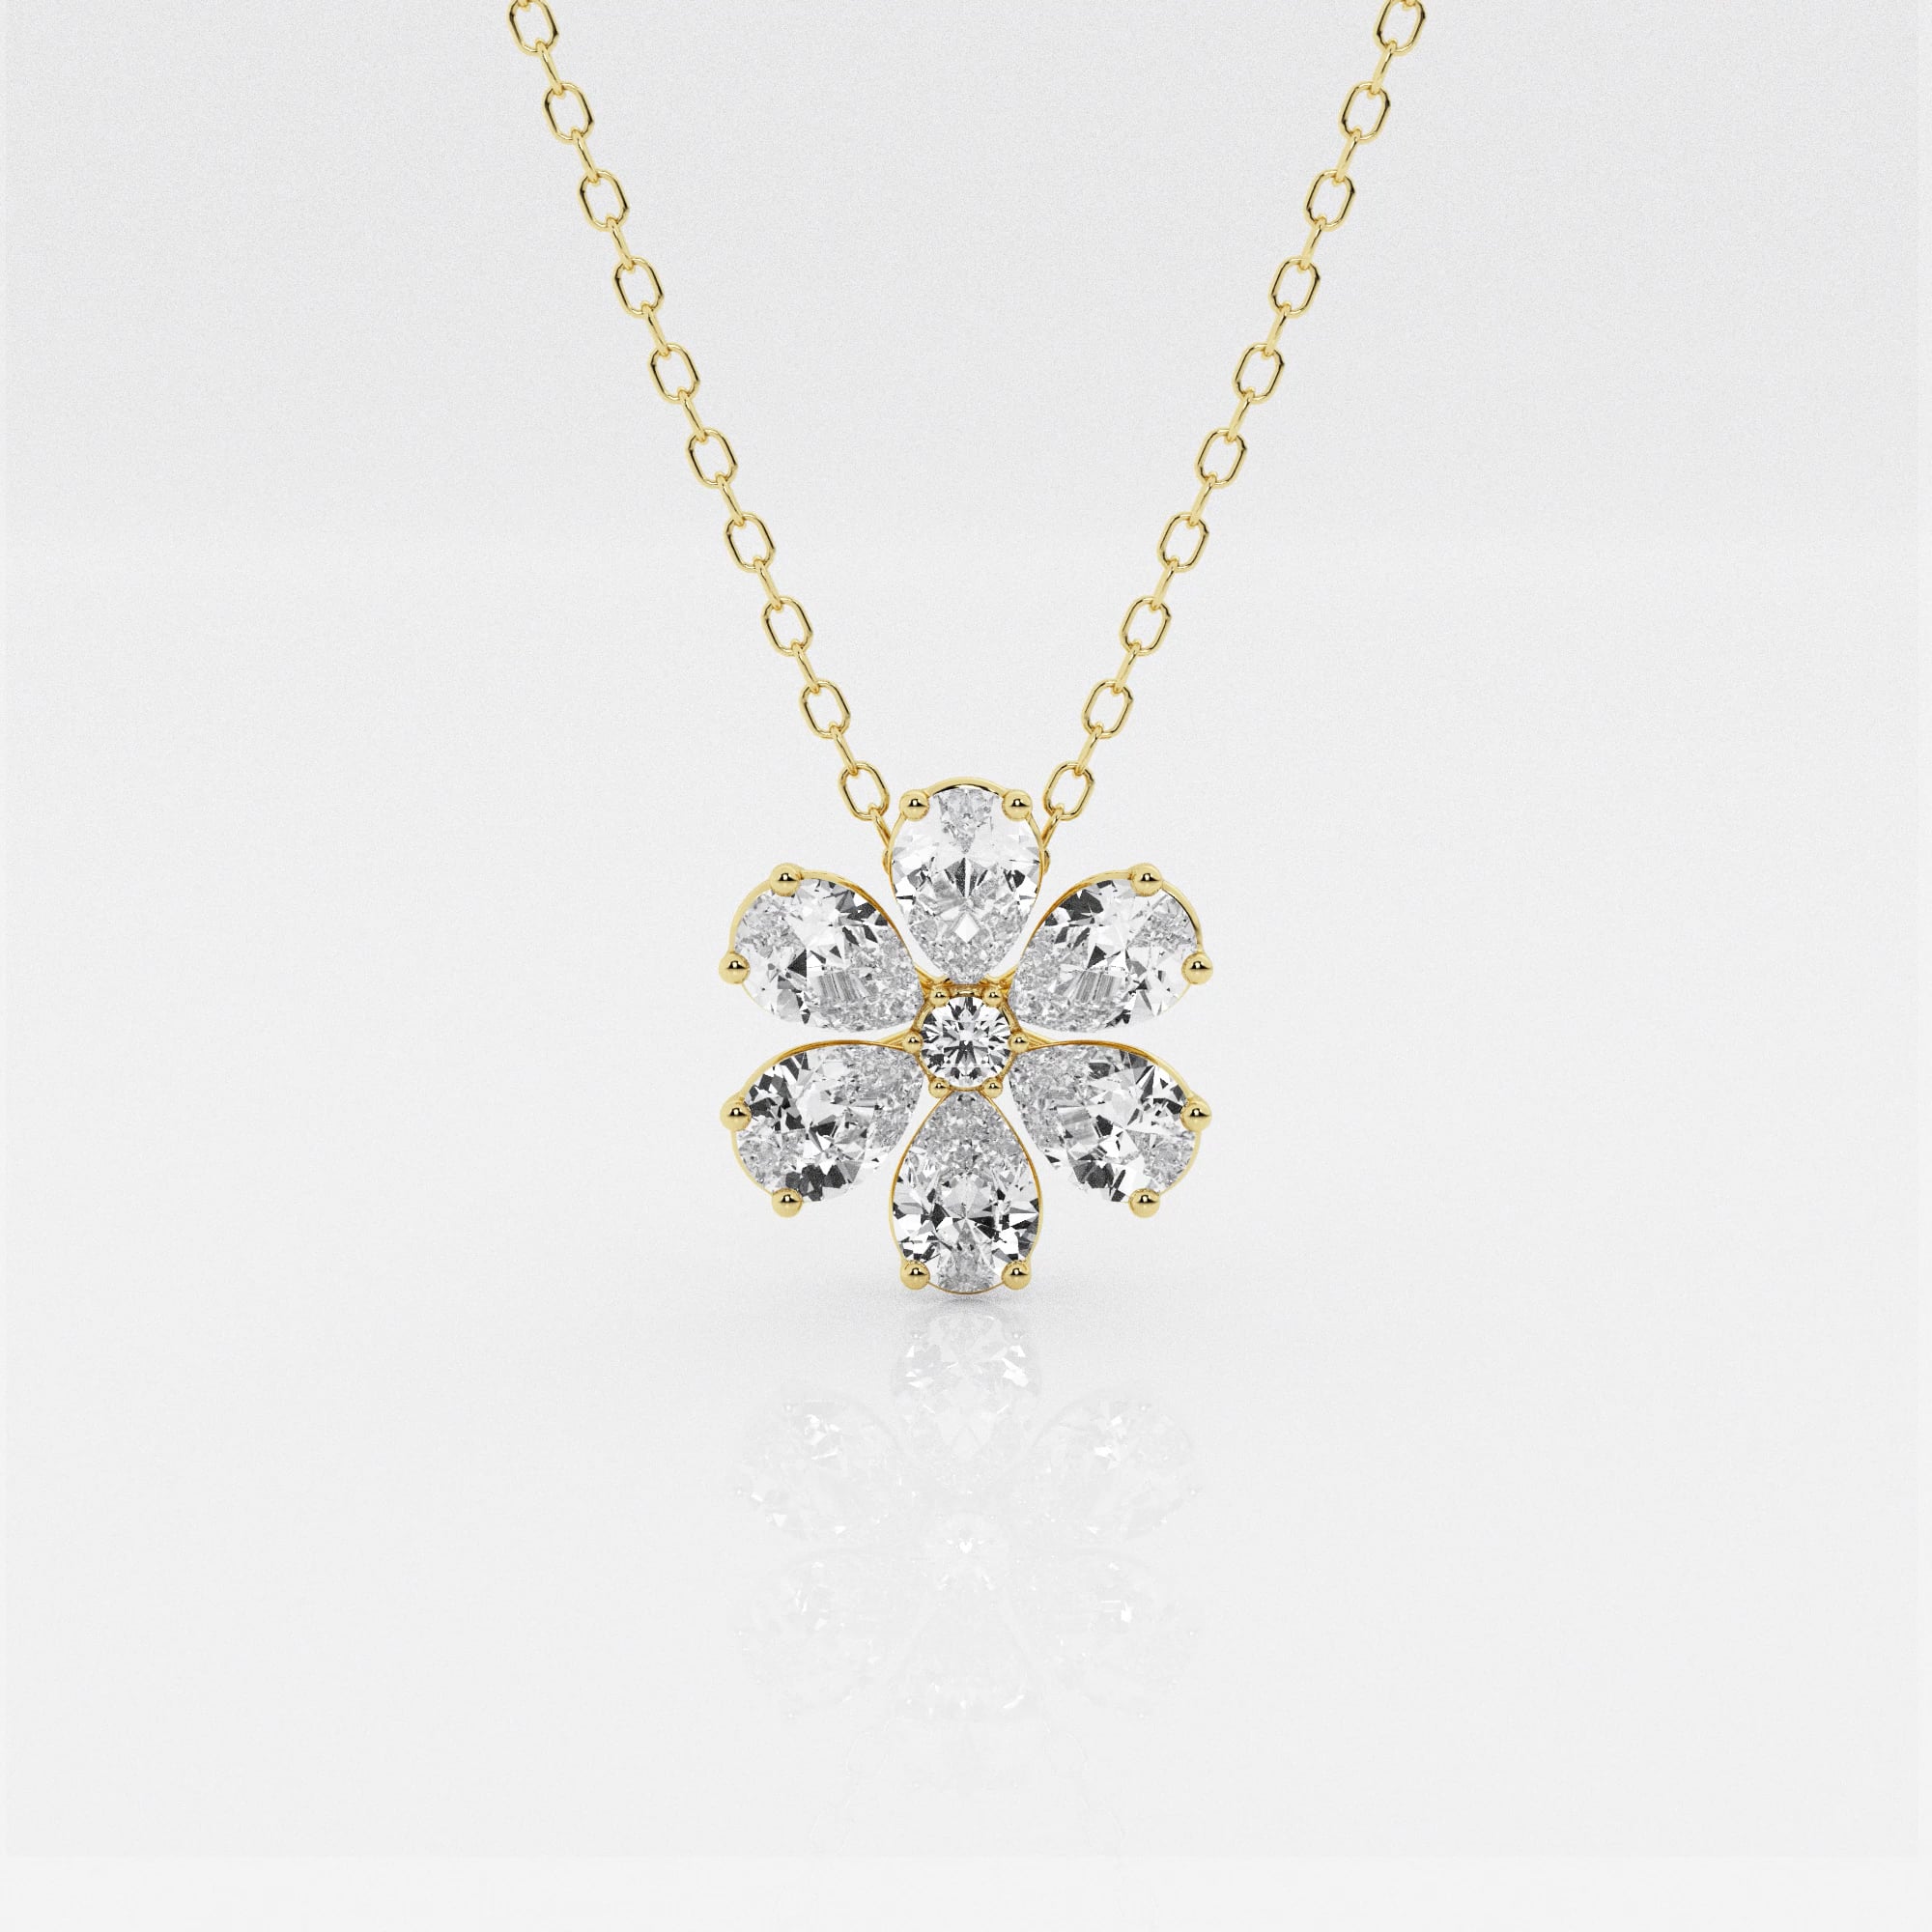 product video for Badgley Mischka 7/8 ctw Pear and Round Lab Grown Diamond Flower Fashion Pendant with Adjustable Chain